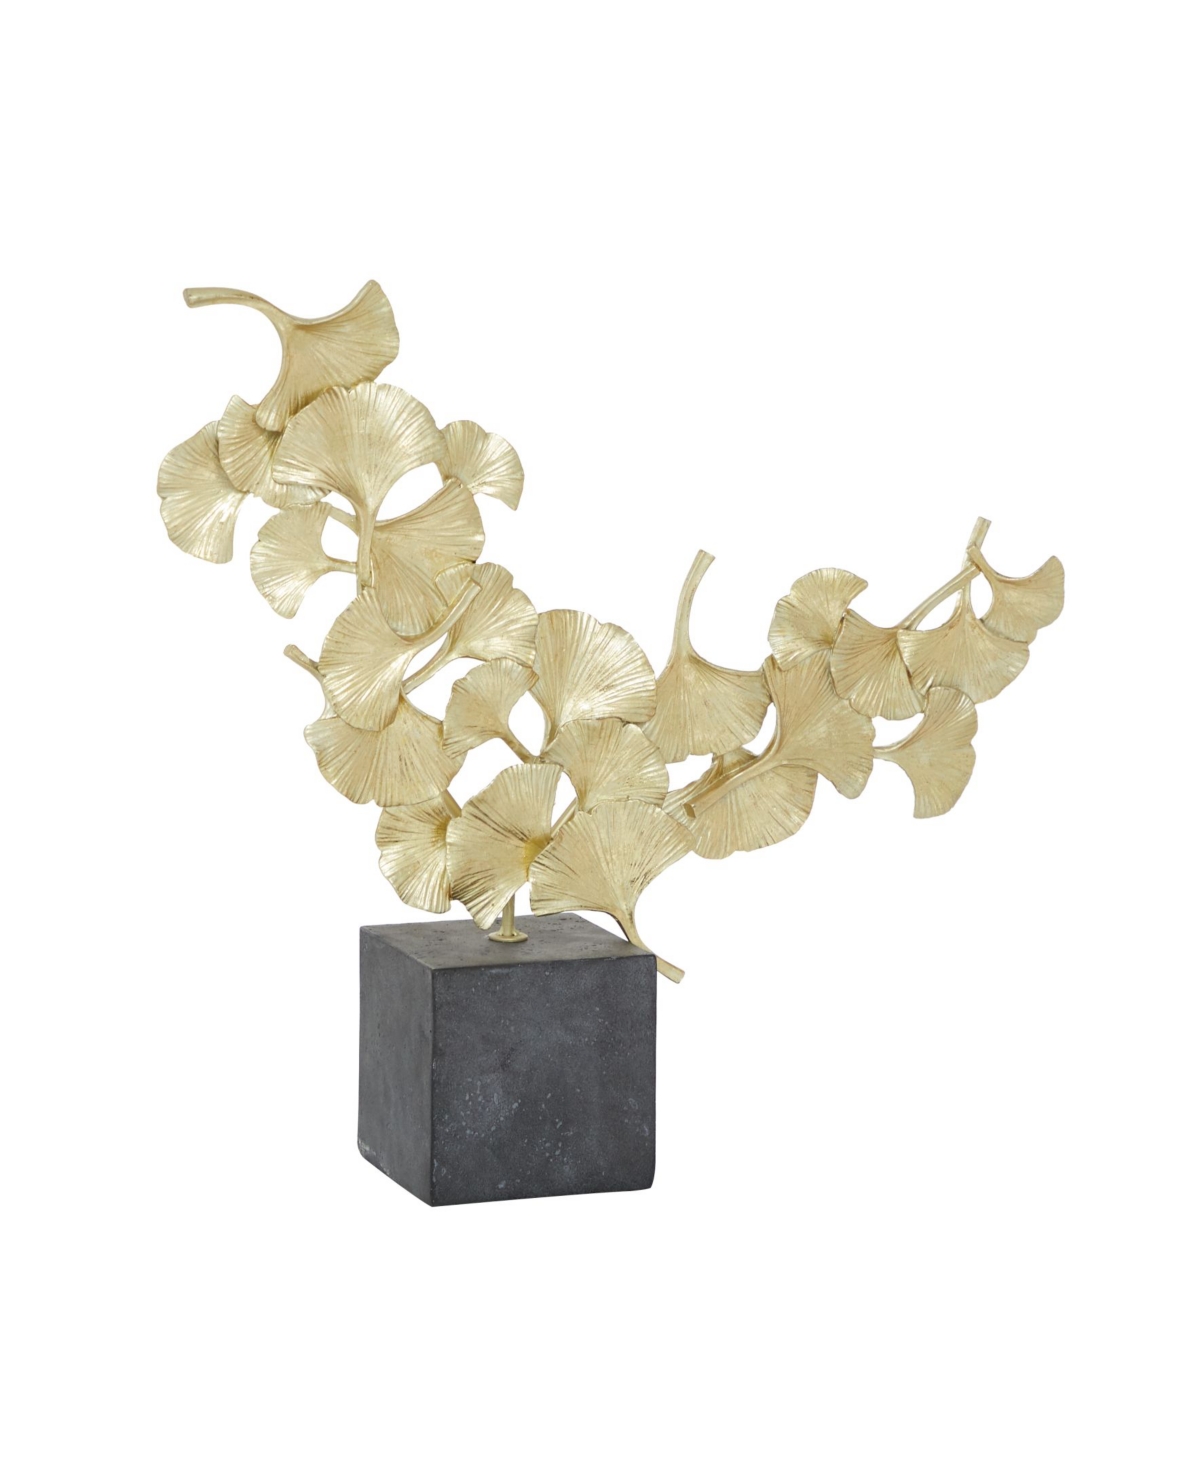 Cosmoliving By Cosmopolitan Polyresin Contemporary Gingko Leaf Sculpture, 17" X 18" In Gold-tone